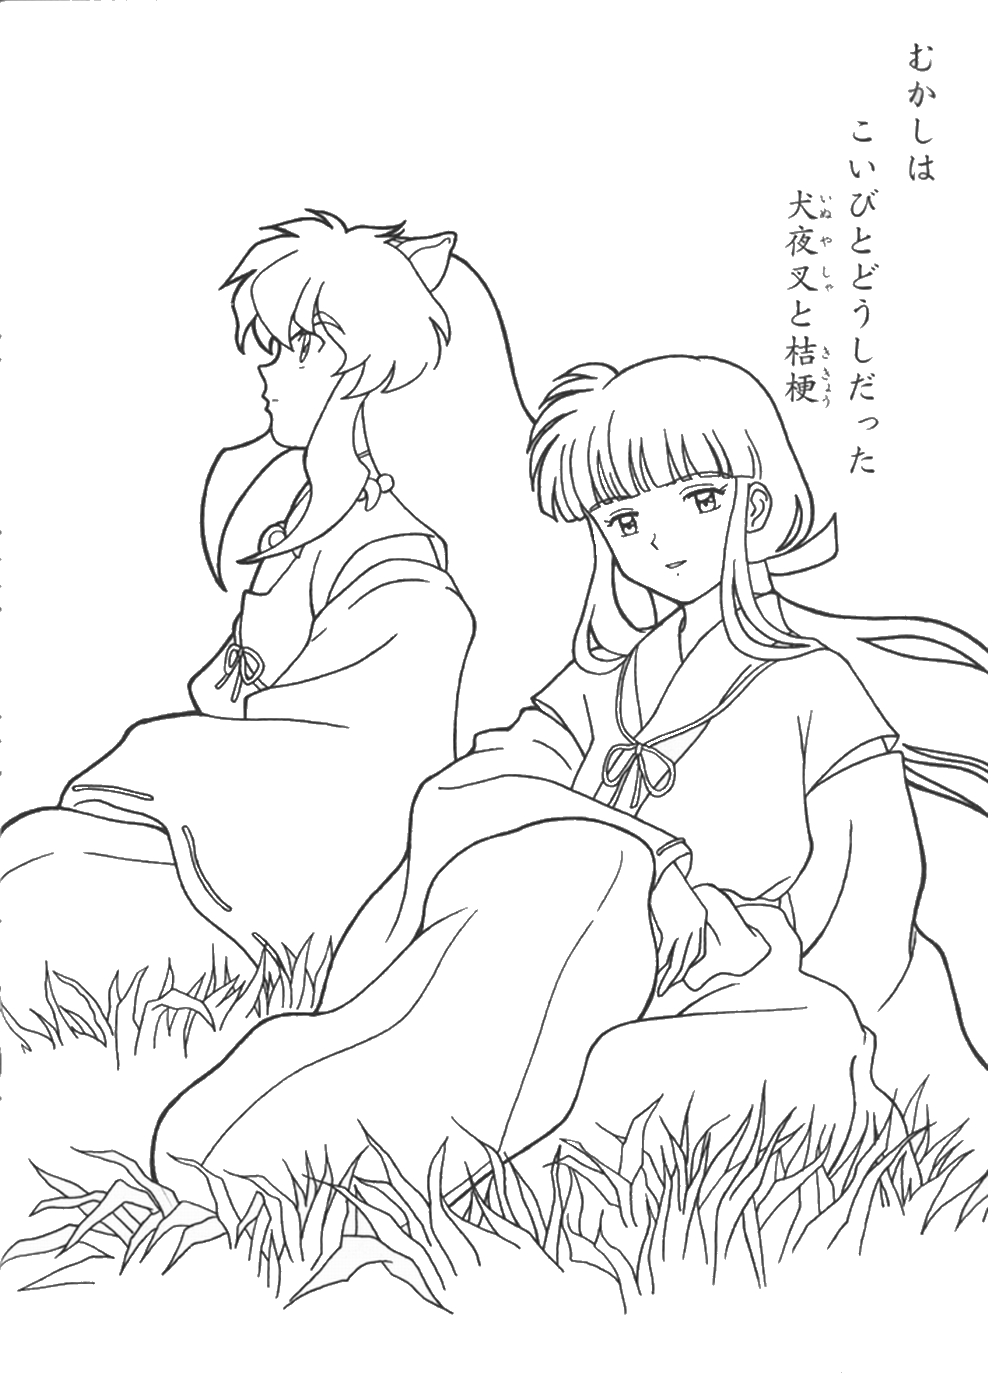 Inuyasha Printable Coloring Pages Anime inuyasha_cl_13 2021 0819 Coloring4free